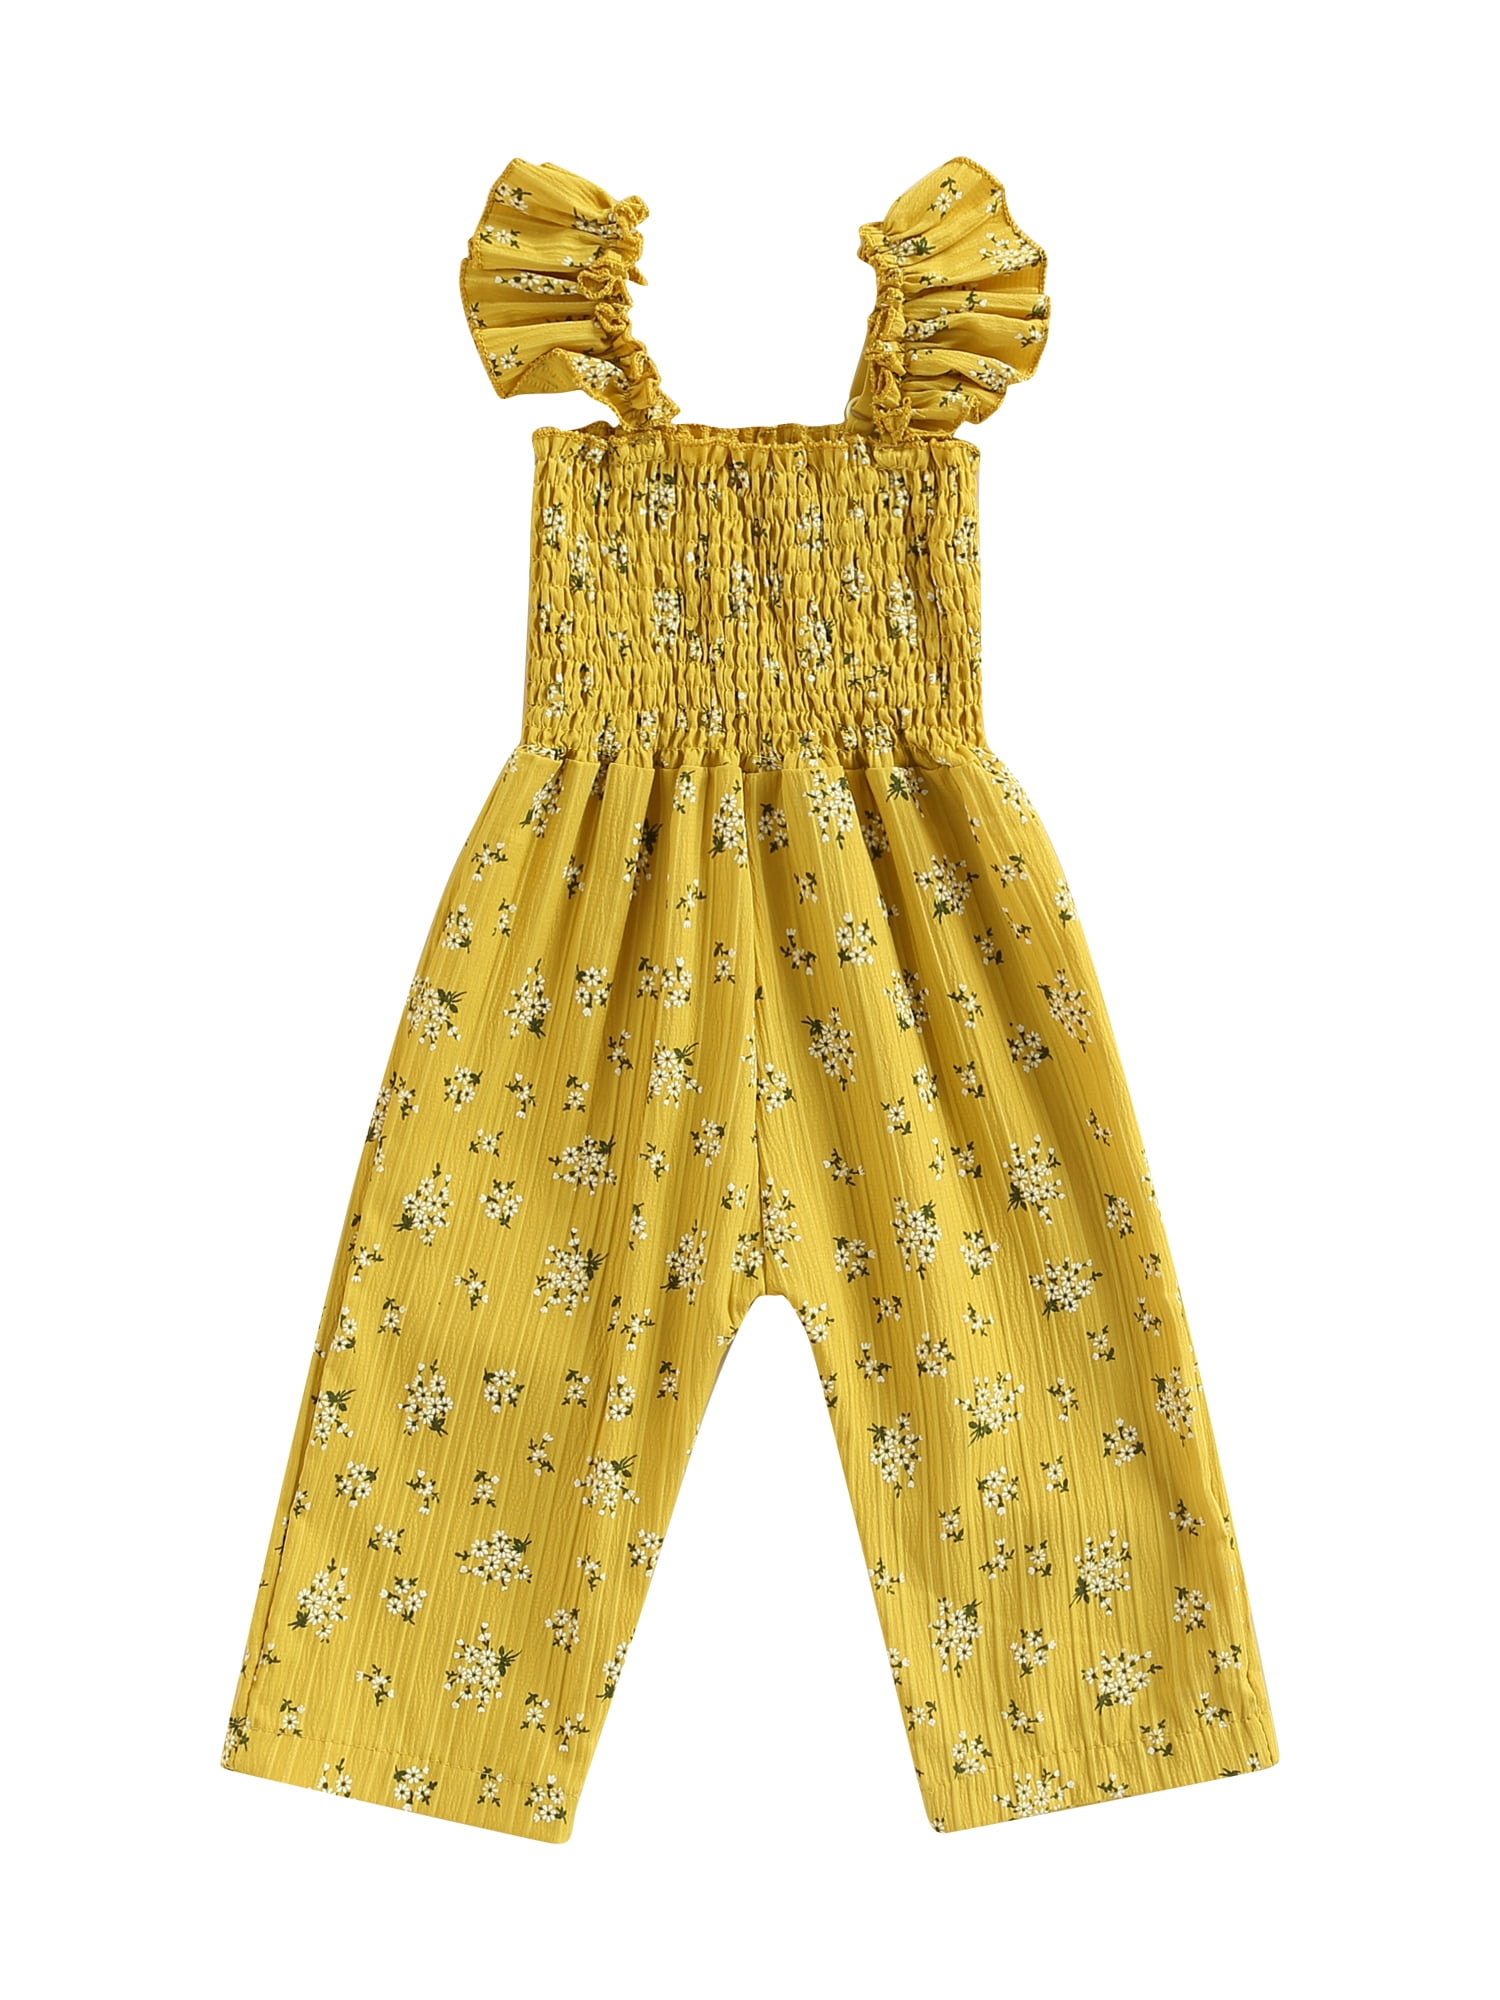 discount 57% Pull&Bear jumpsuit Yellow/Multicolored S WOMEN FASHION Baby Jumpsuits & Dungarees Print 